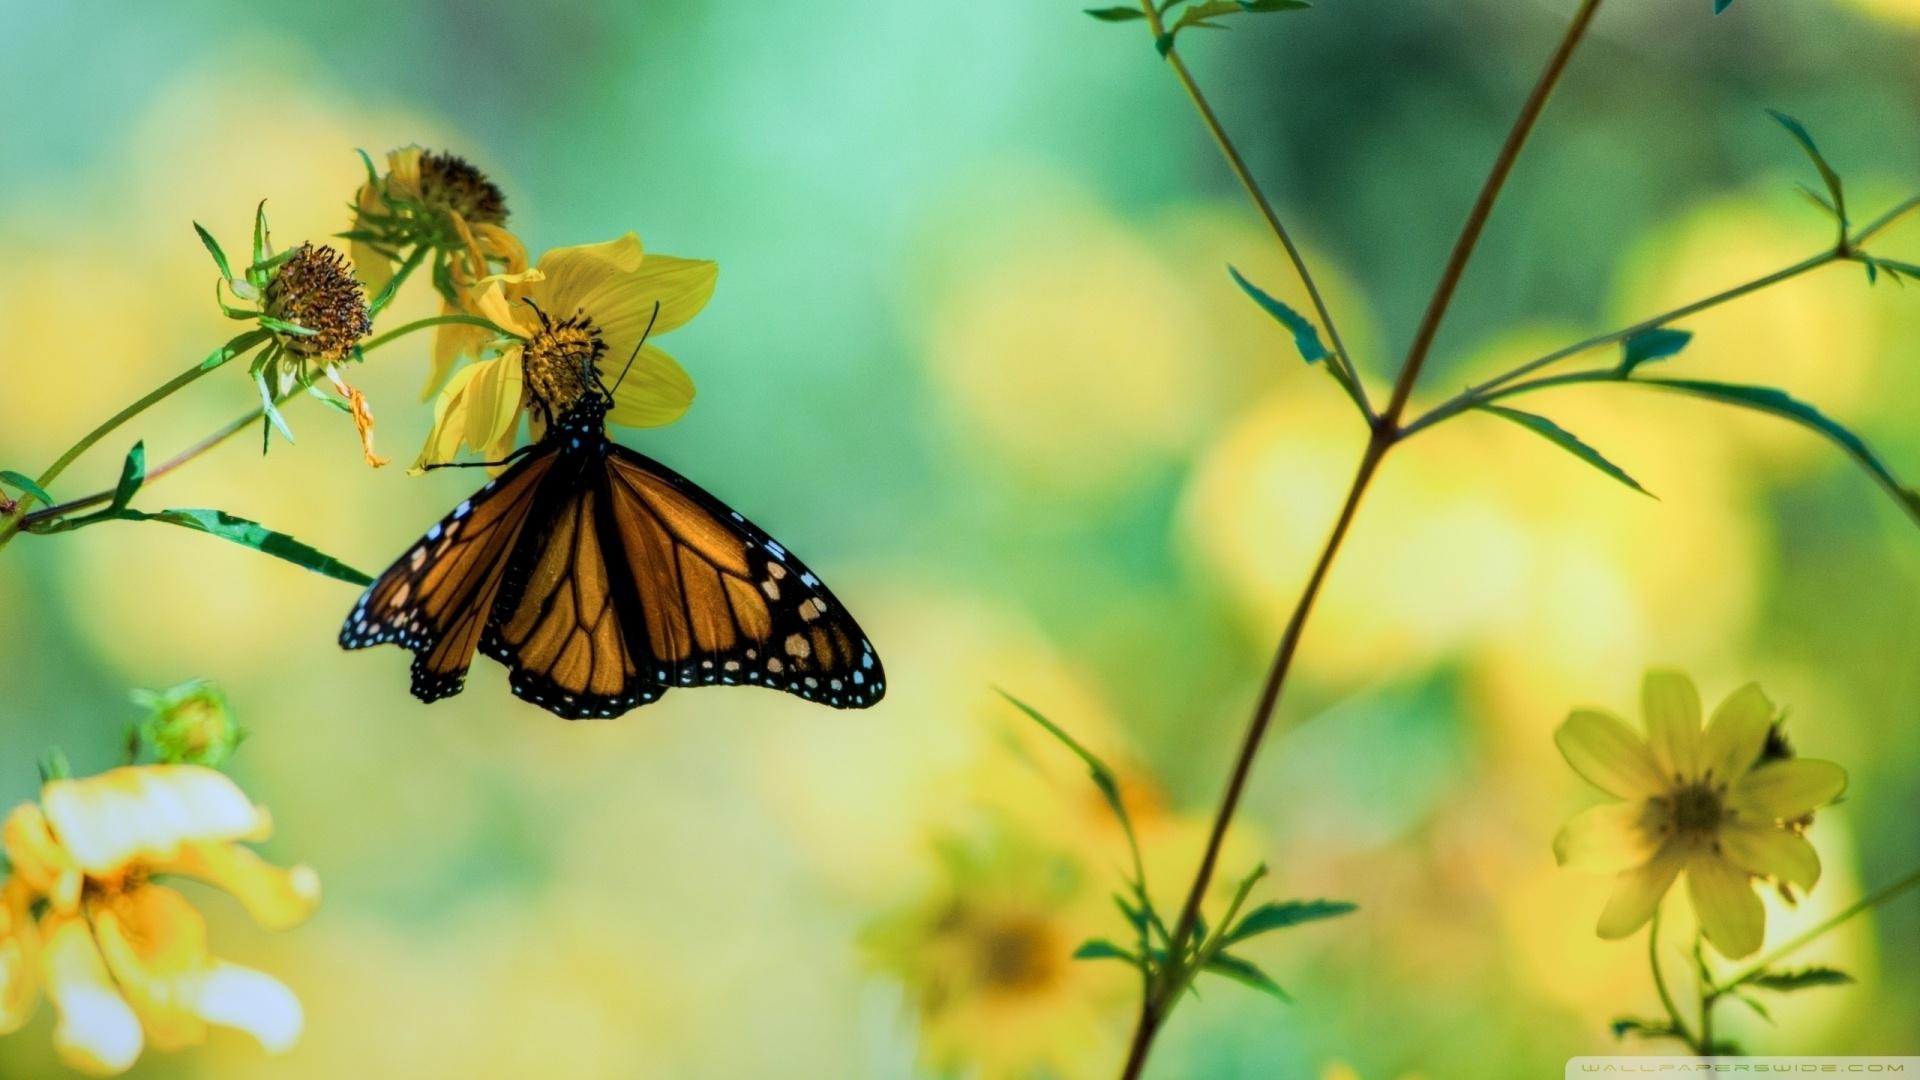 Yellow Butterfly Aesthetic Wallpapers - Wallpaper Cave